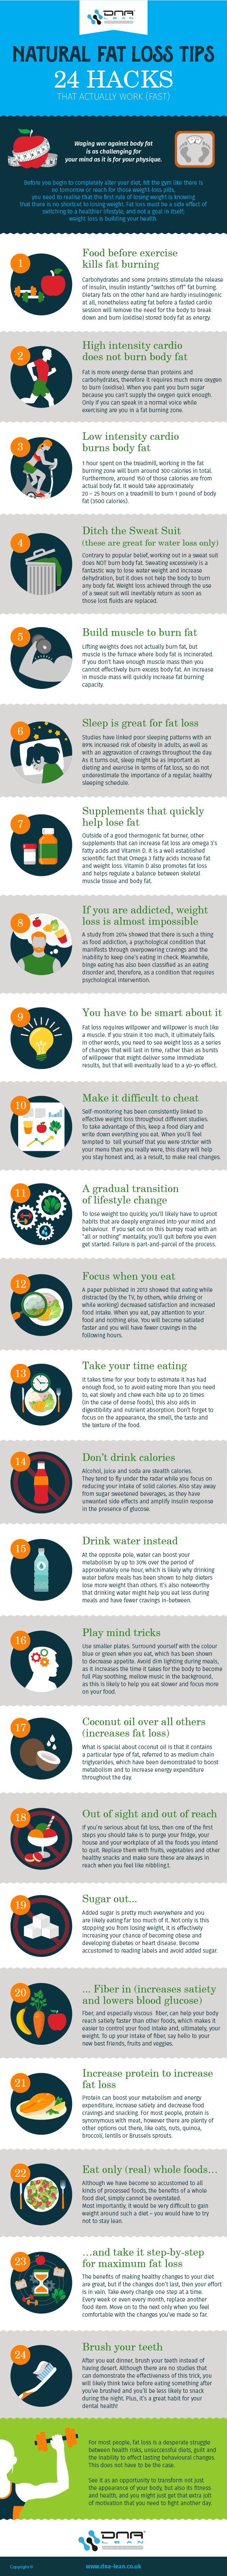 24 fat loss tips infographic